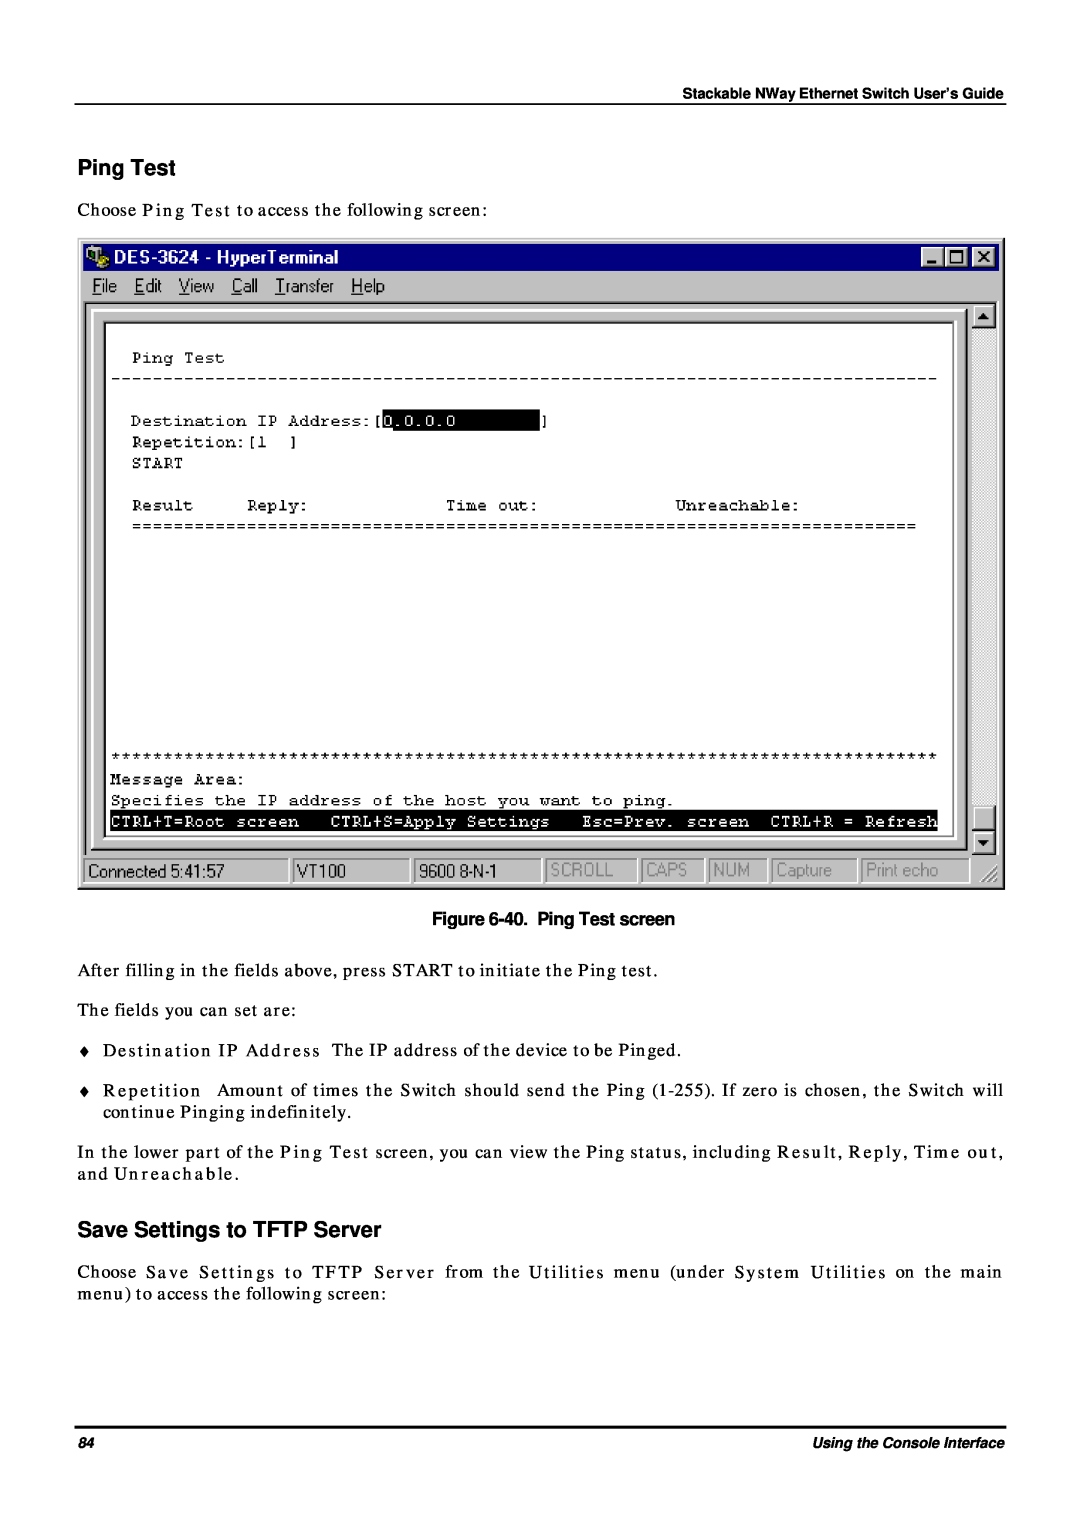 D-Link DES-3624 manual Save Settings to TFTP Server, 40. Ping Test screen 